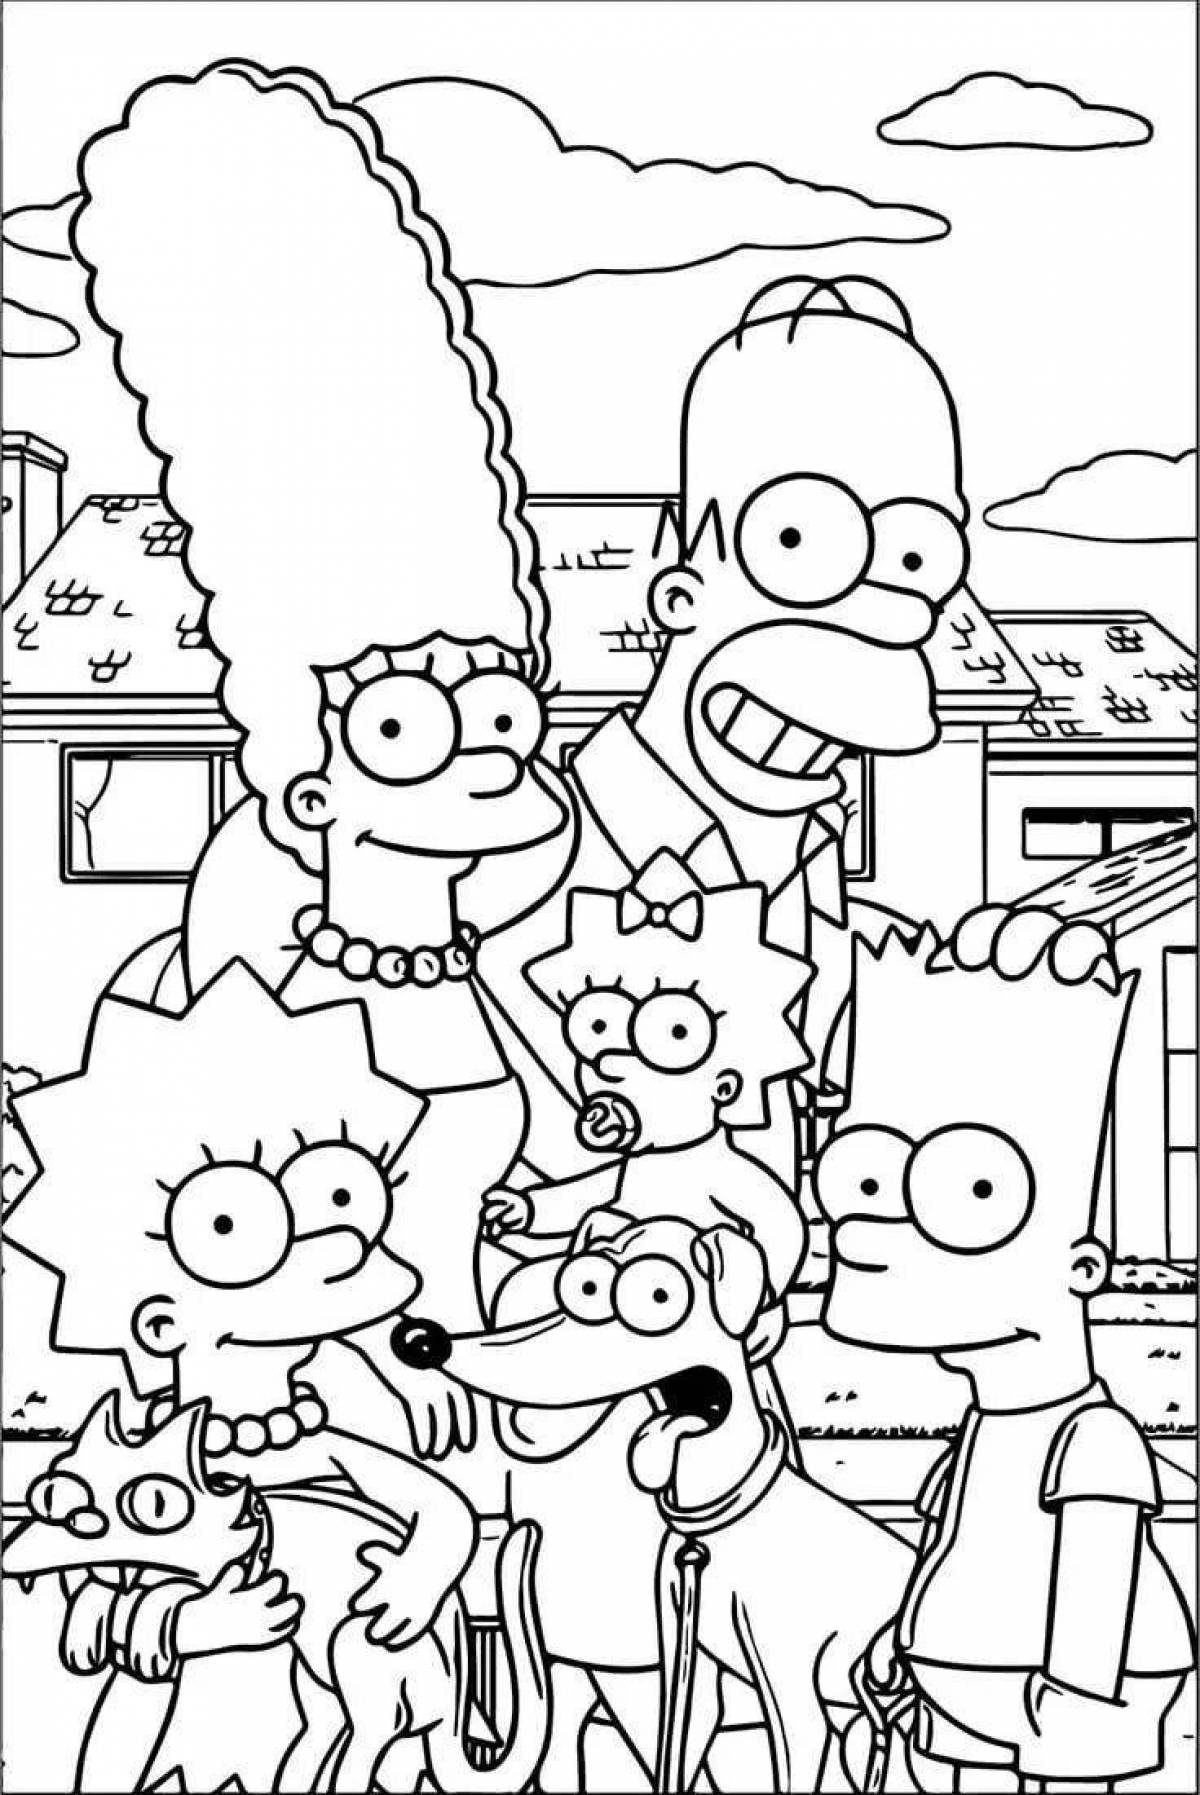 Simson awesome coloring book